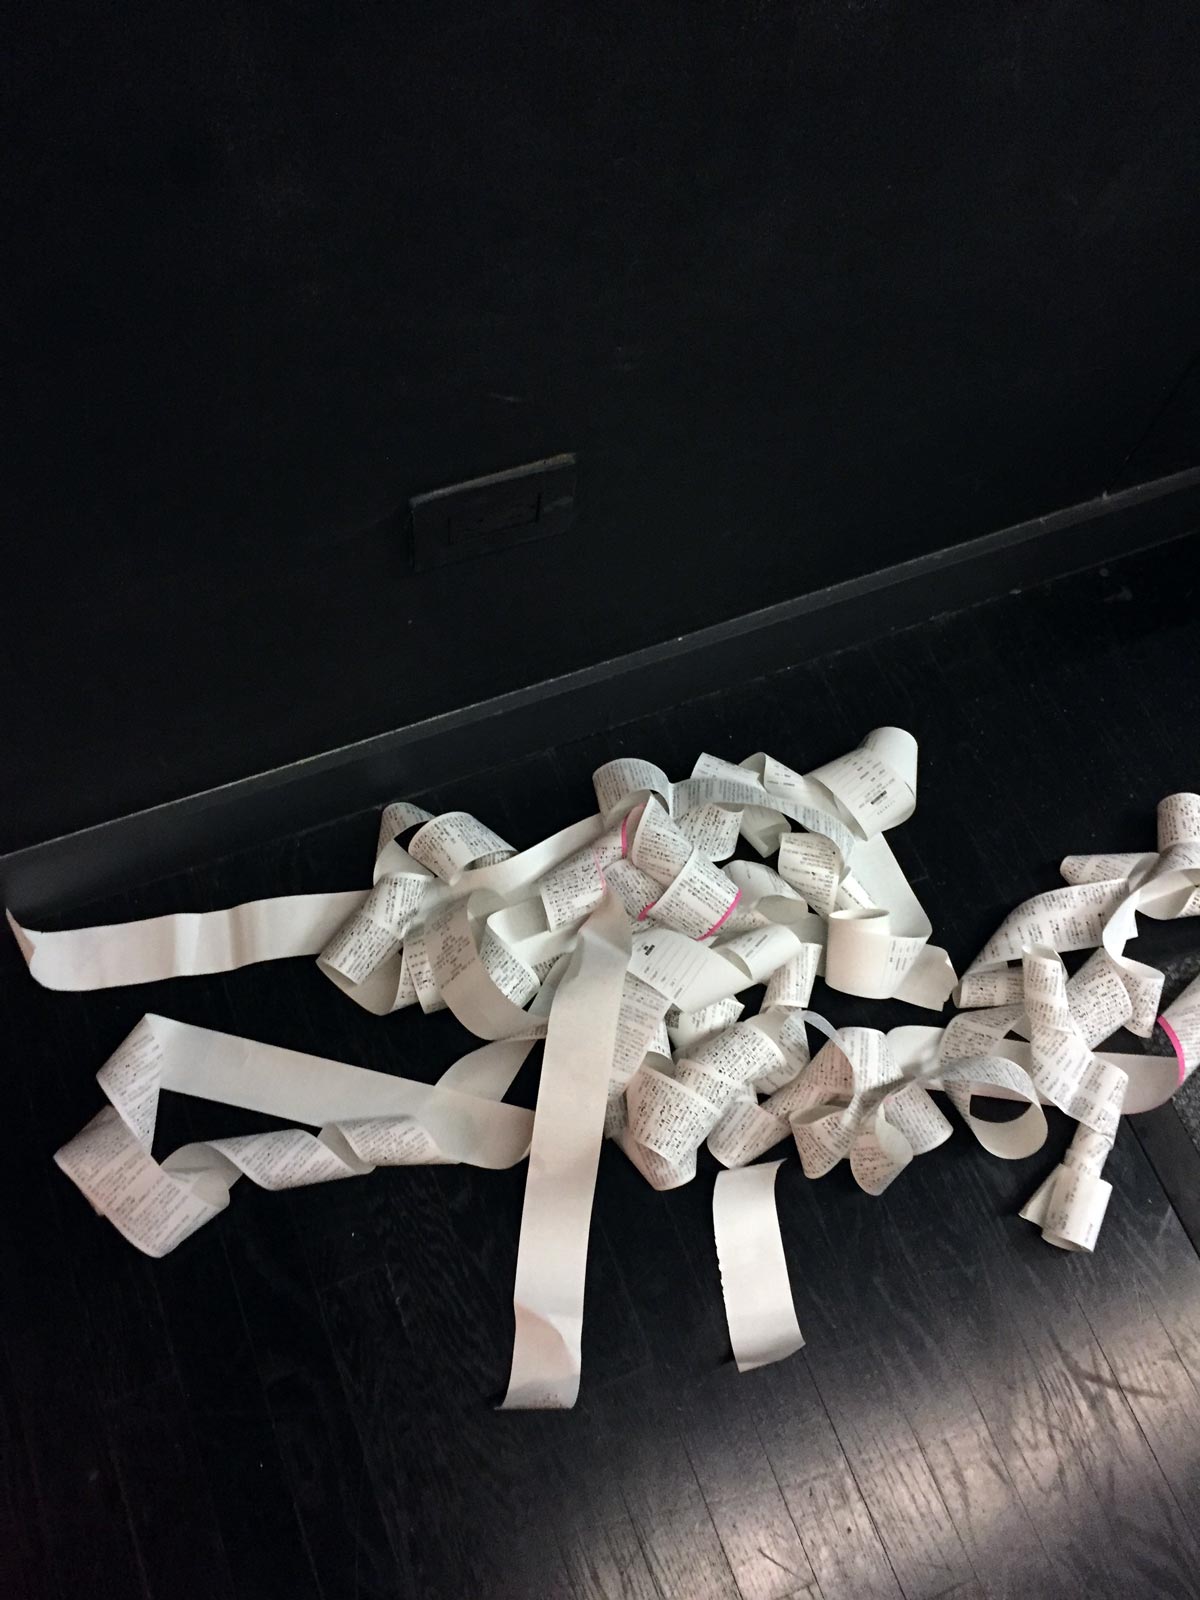 A pile of printed thermal paper, gathered on the floor. This was the result of a bug in the code that forced all the printers to print gibberish while the device was plugged in overnight.